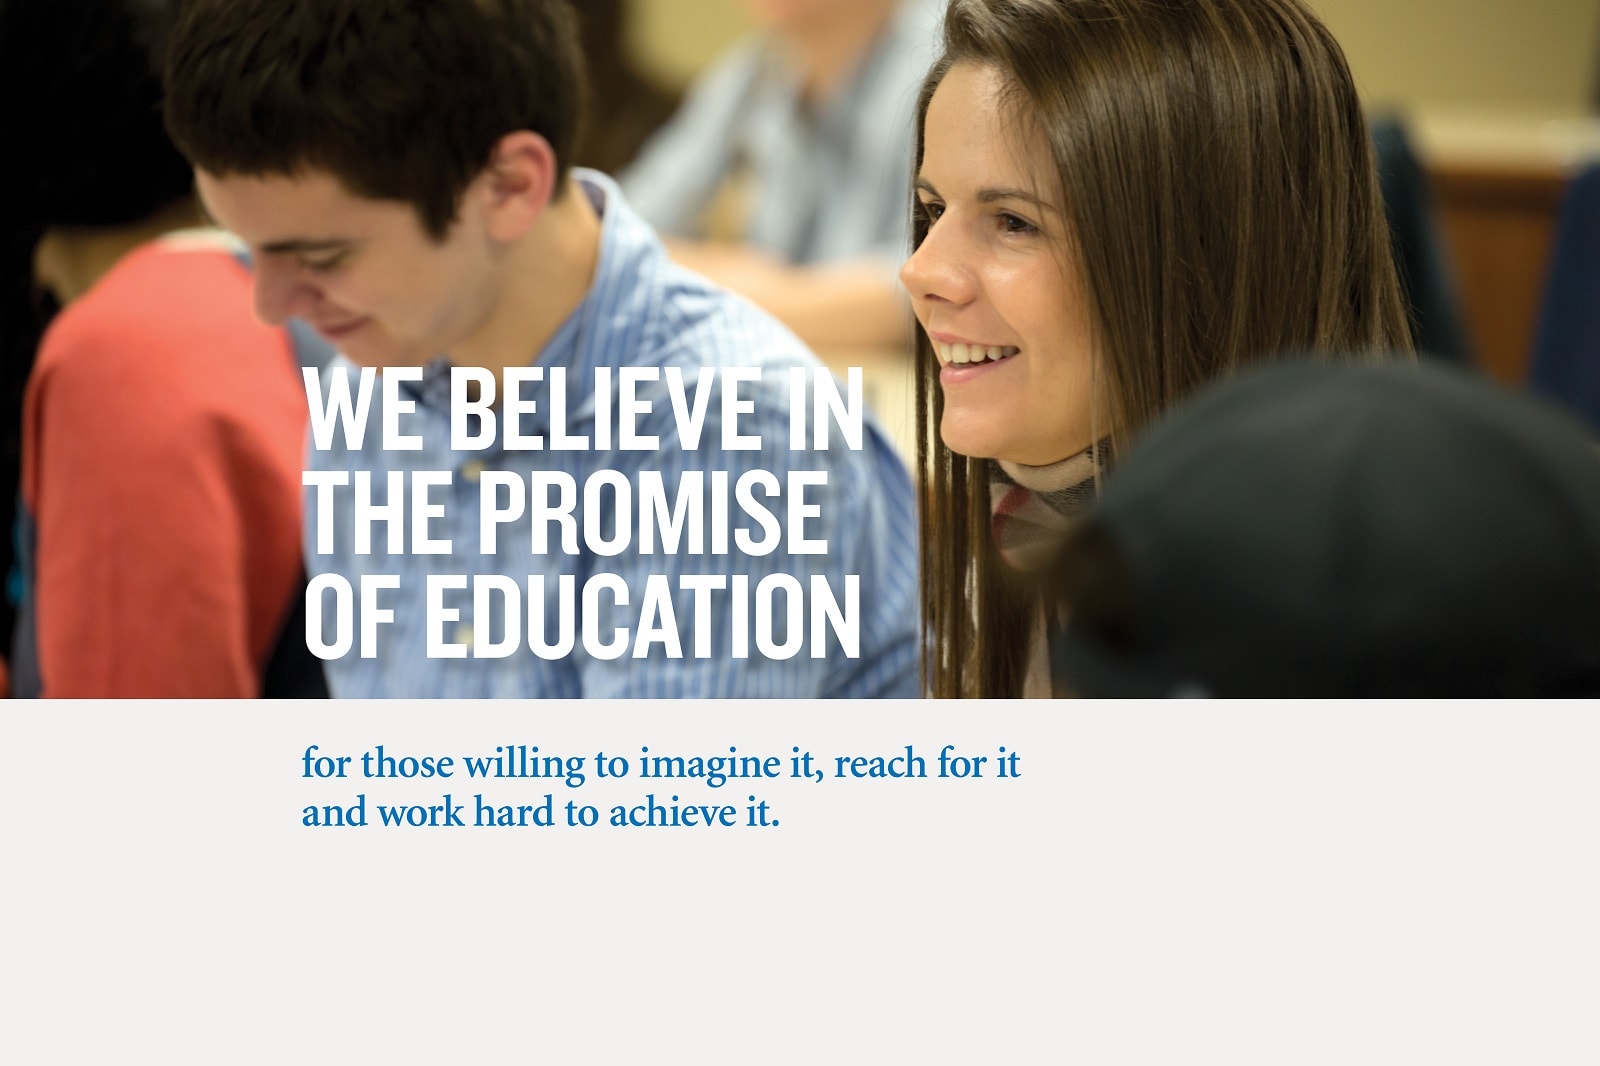 We believe in the promise of education.